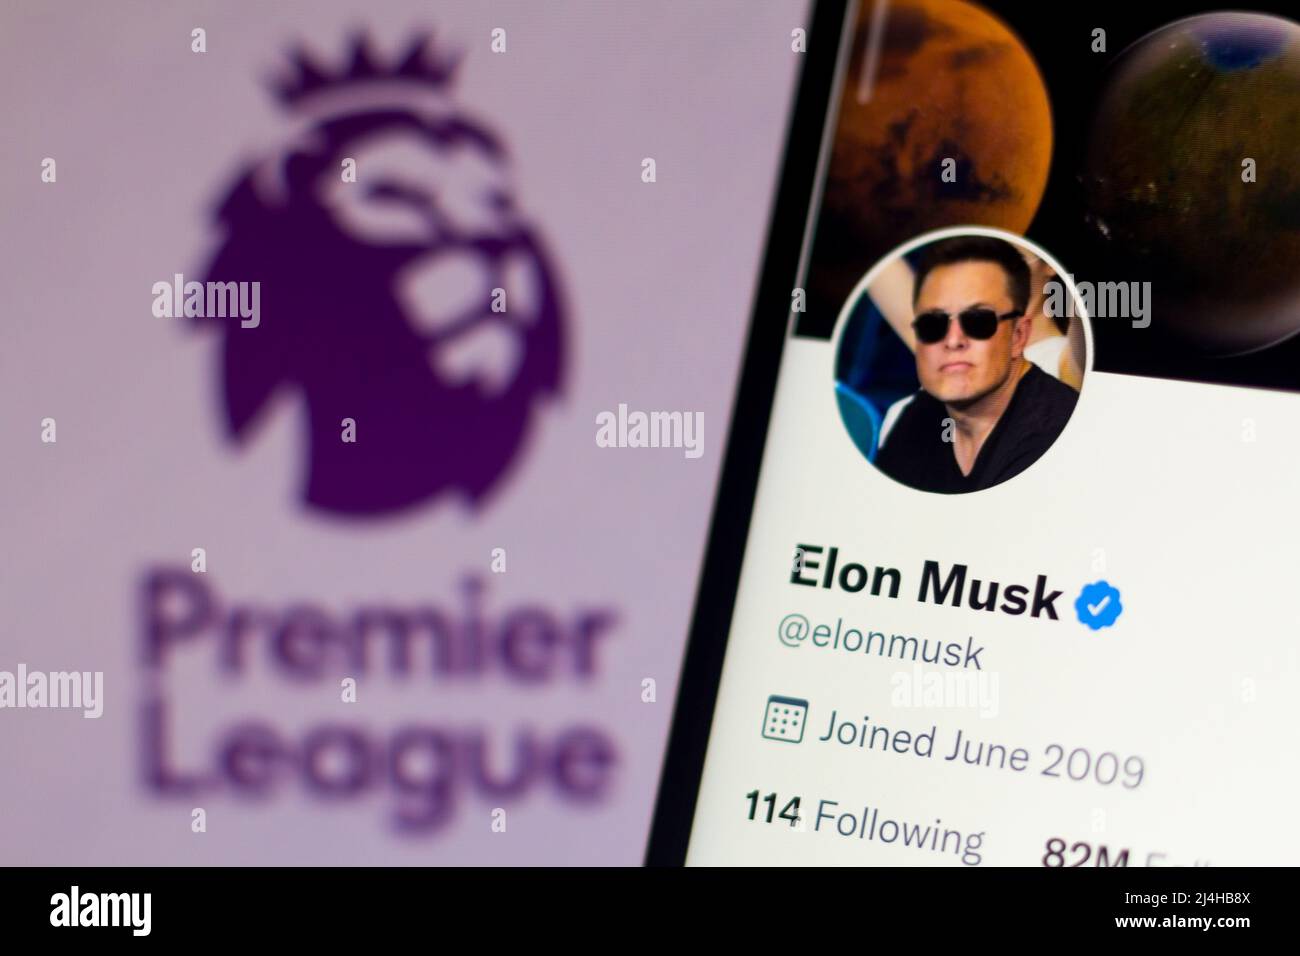 In this photo illustration, the official profile of Elon Musk on the social network Twitter and in the background, the Premier League logo. Stock Photo